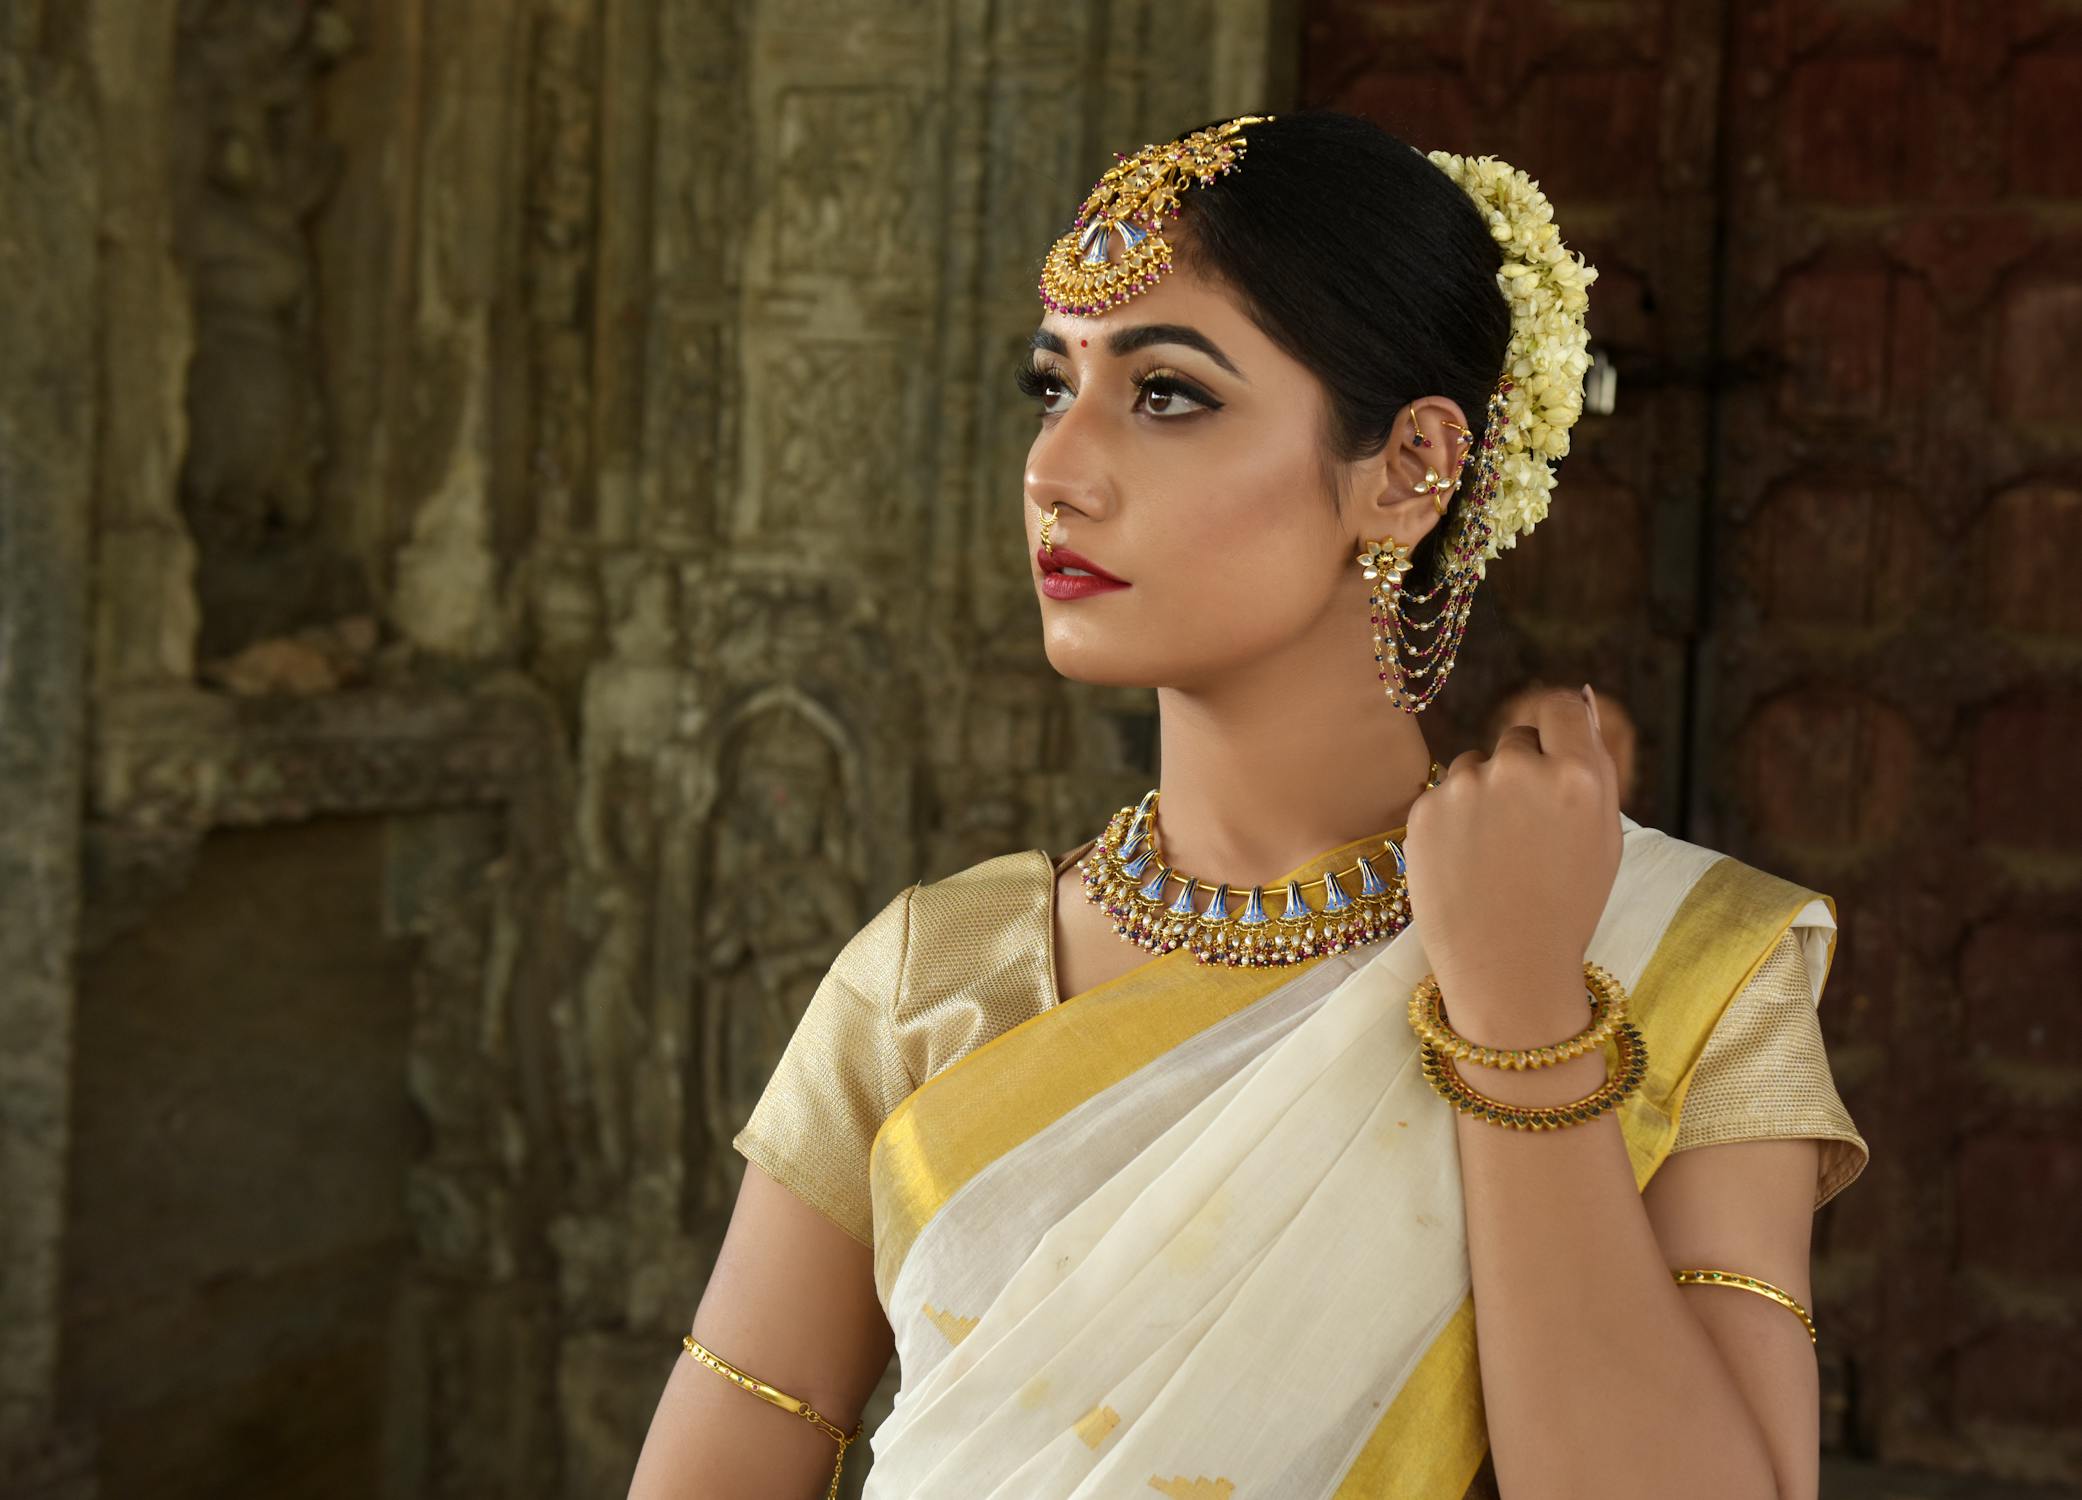 Indian beautiful Woman Photo by Manjeet Singh  Yadav from Pexels: https://www.pexels.com/photo/woman-in-white-and-yellow-dress-with-scarf-1162983/